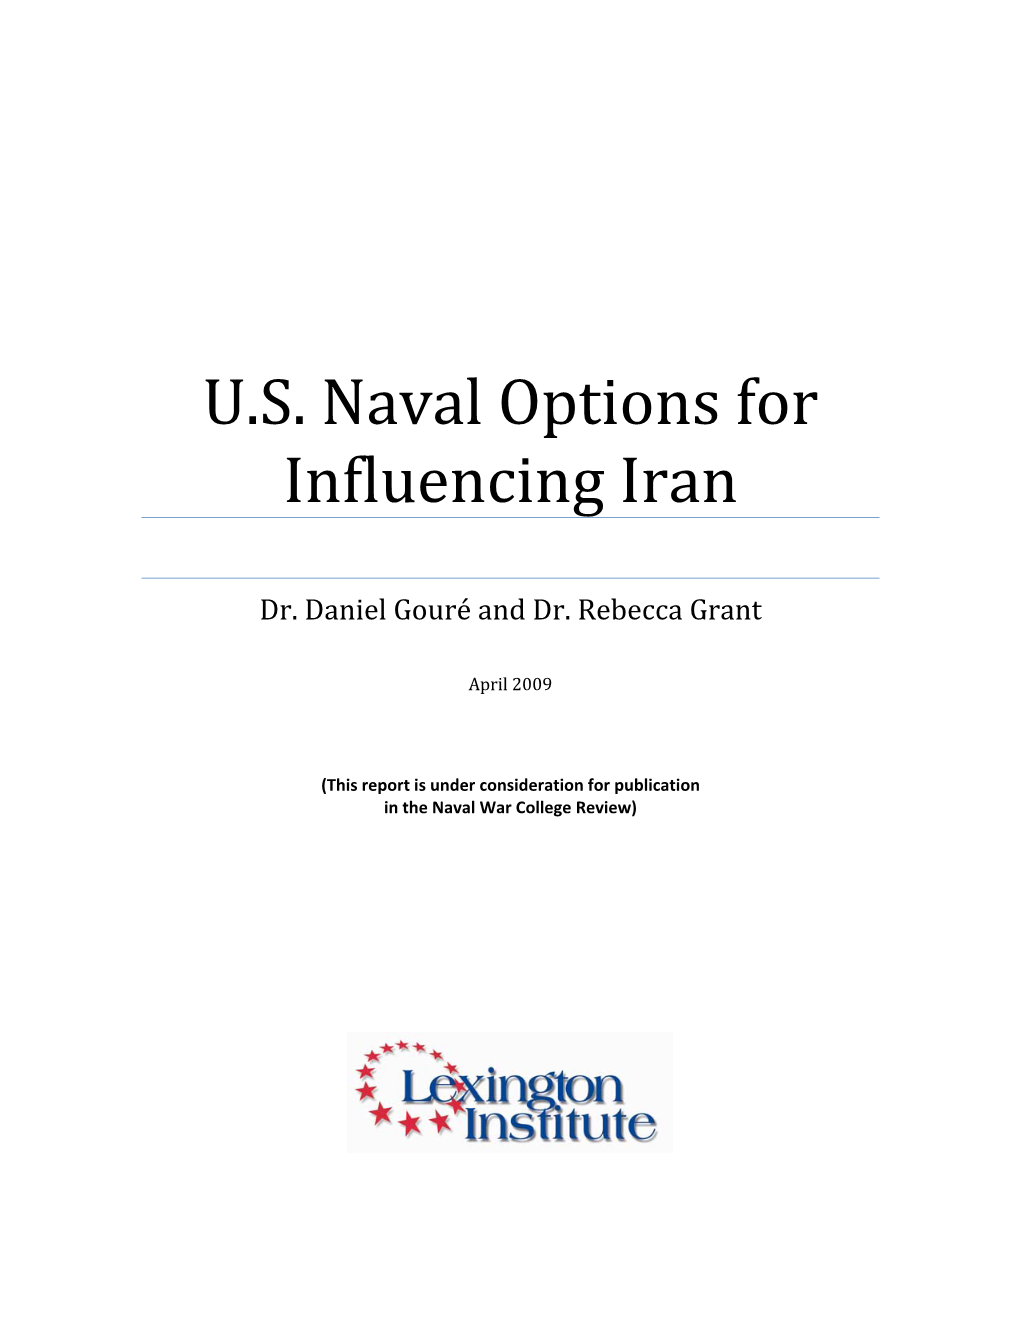 U.S. Naval Options for Influencing Iran